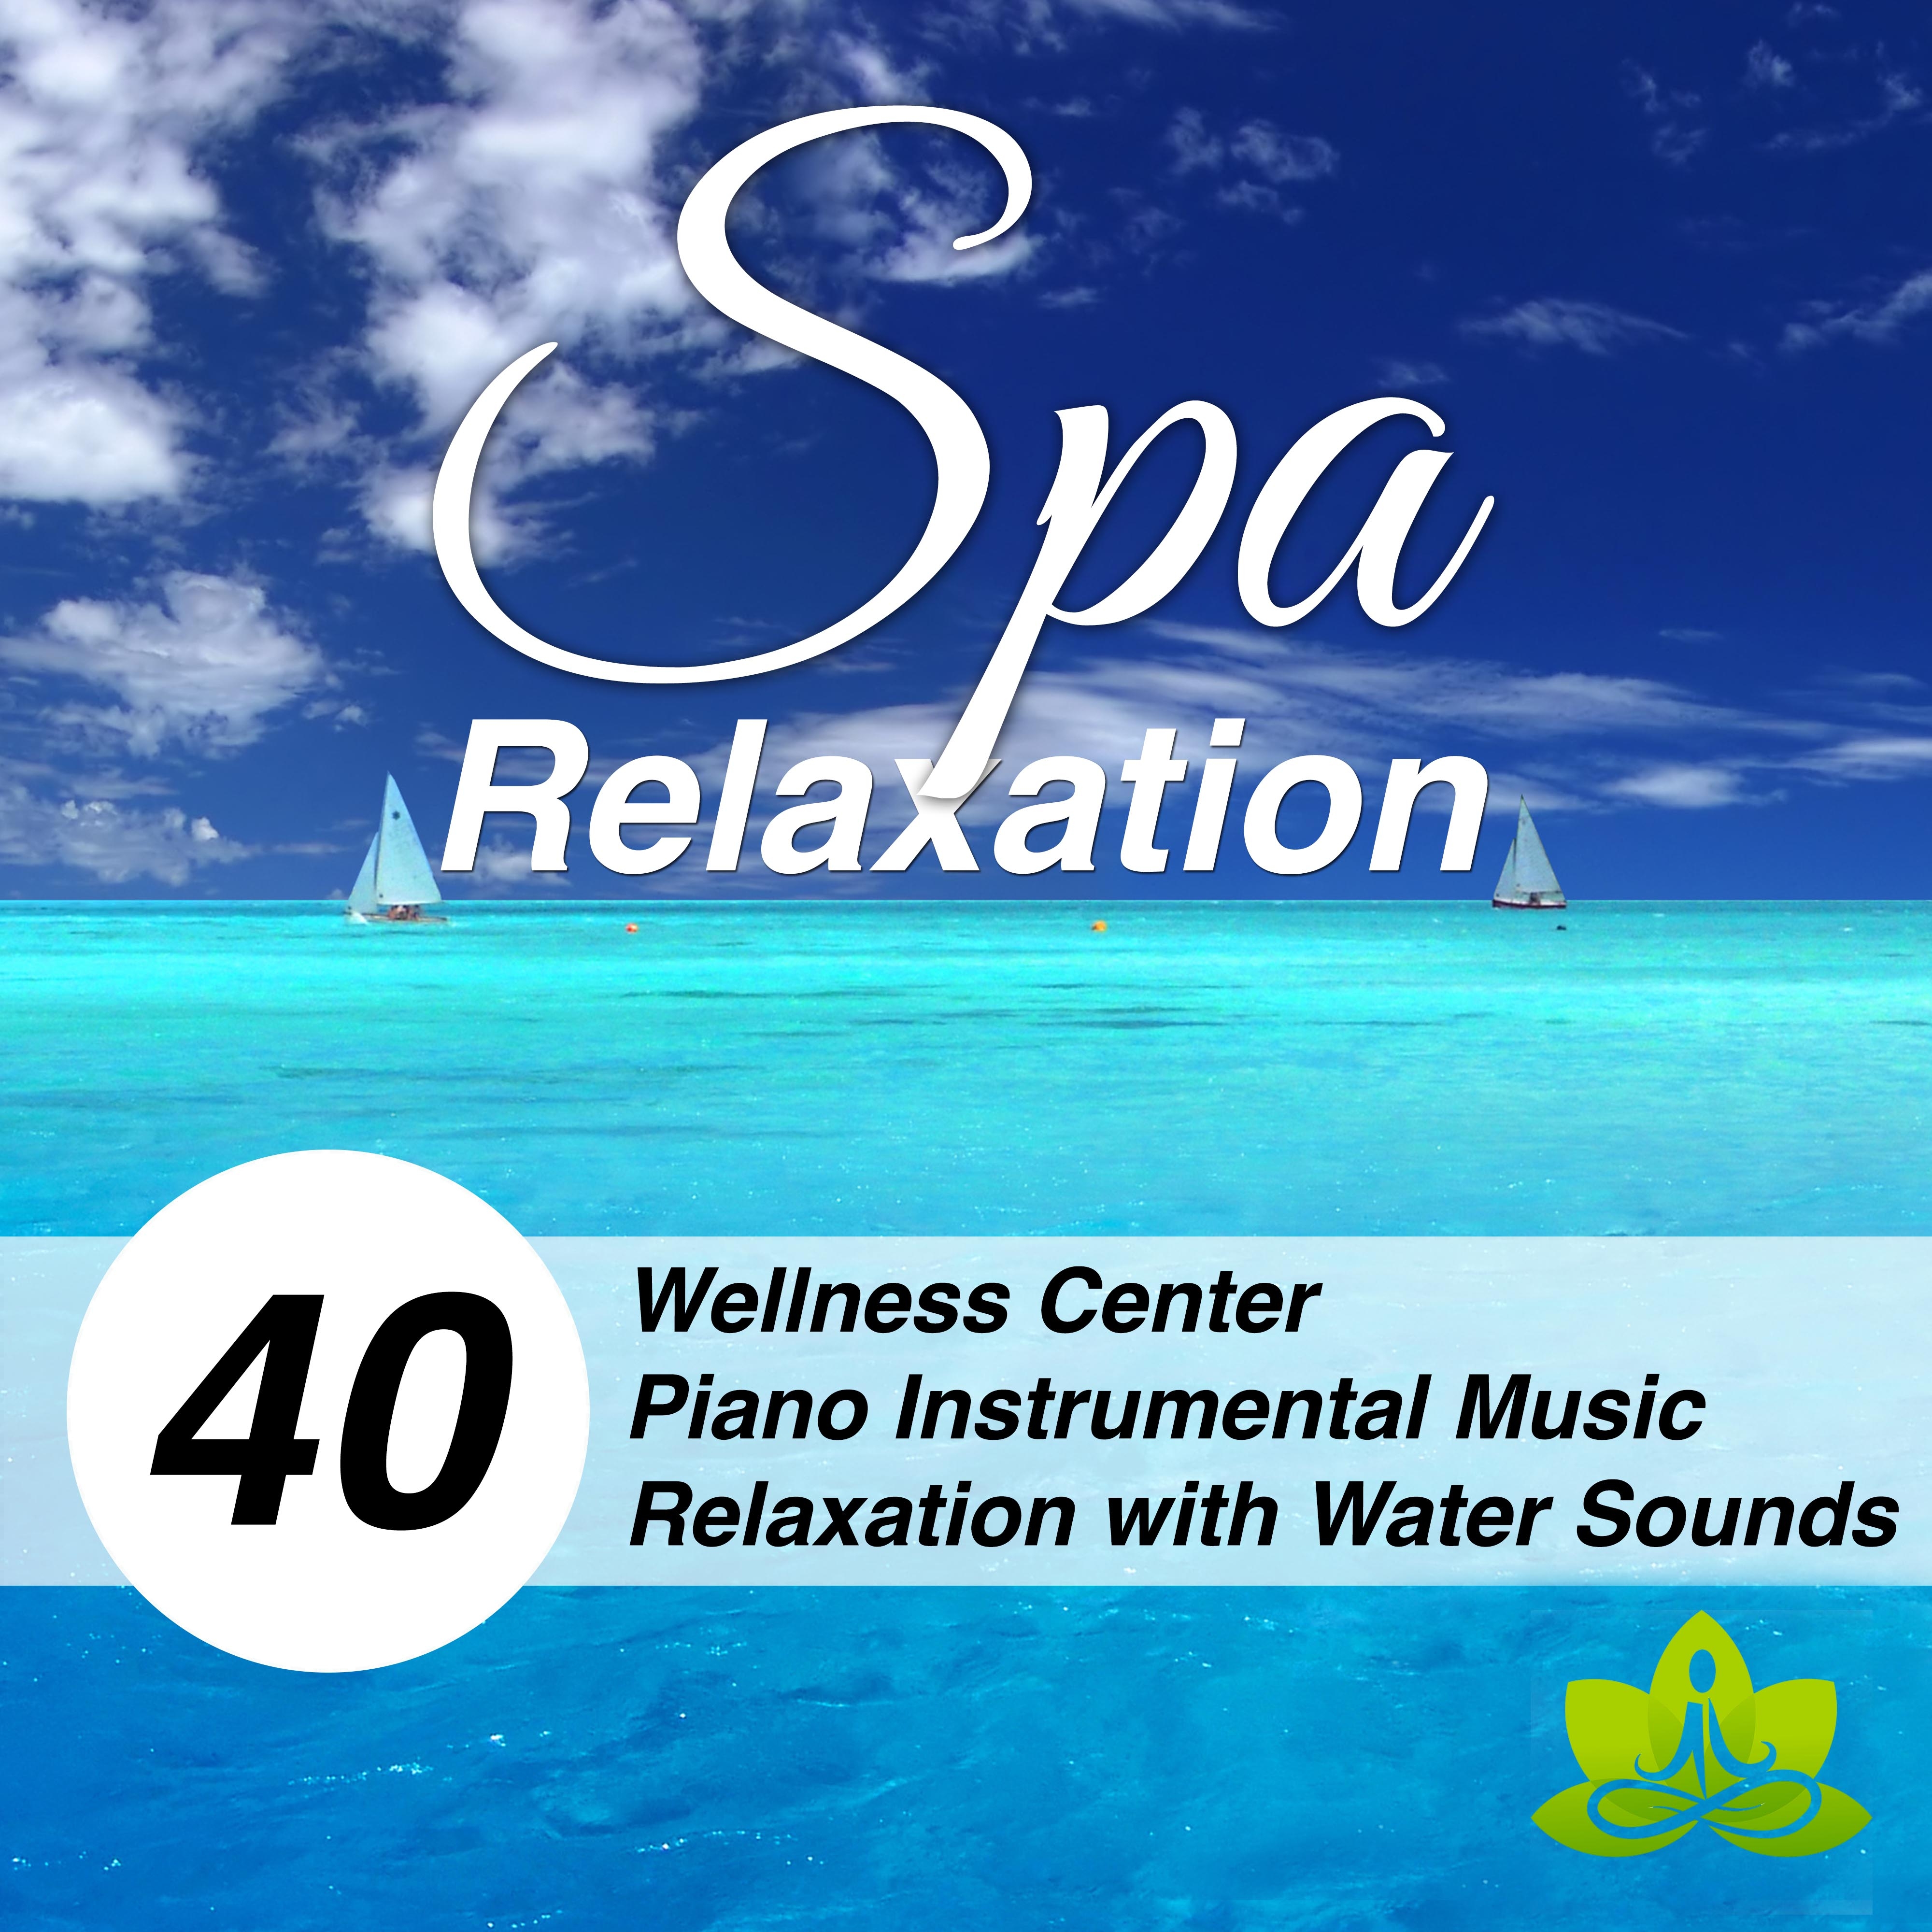 Spa Relaxation - Wellness Center Instrumental Music for Deep Relaxation with Water Sounds and Piano Melodies